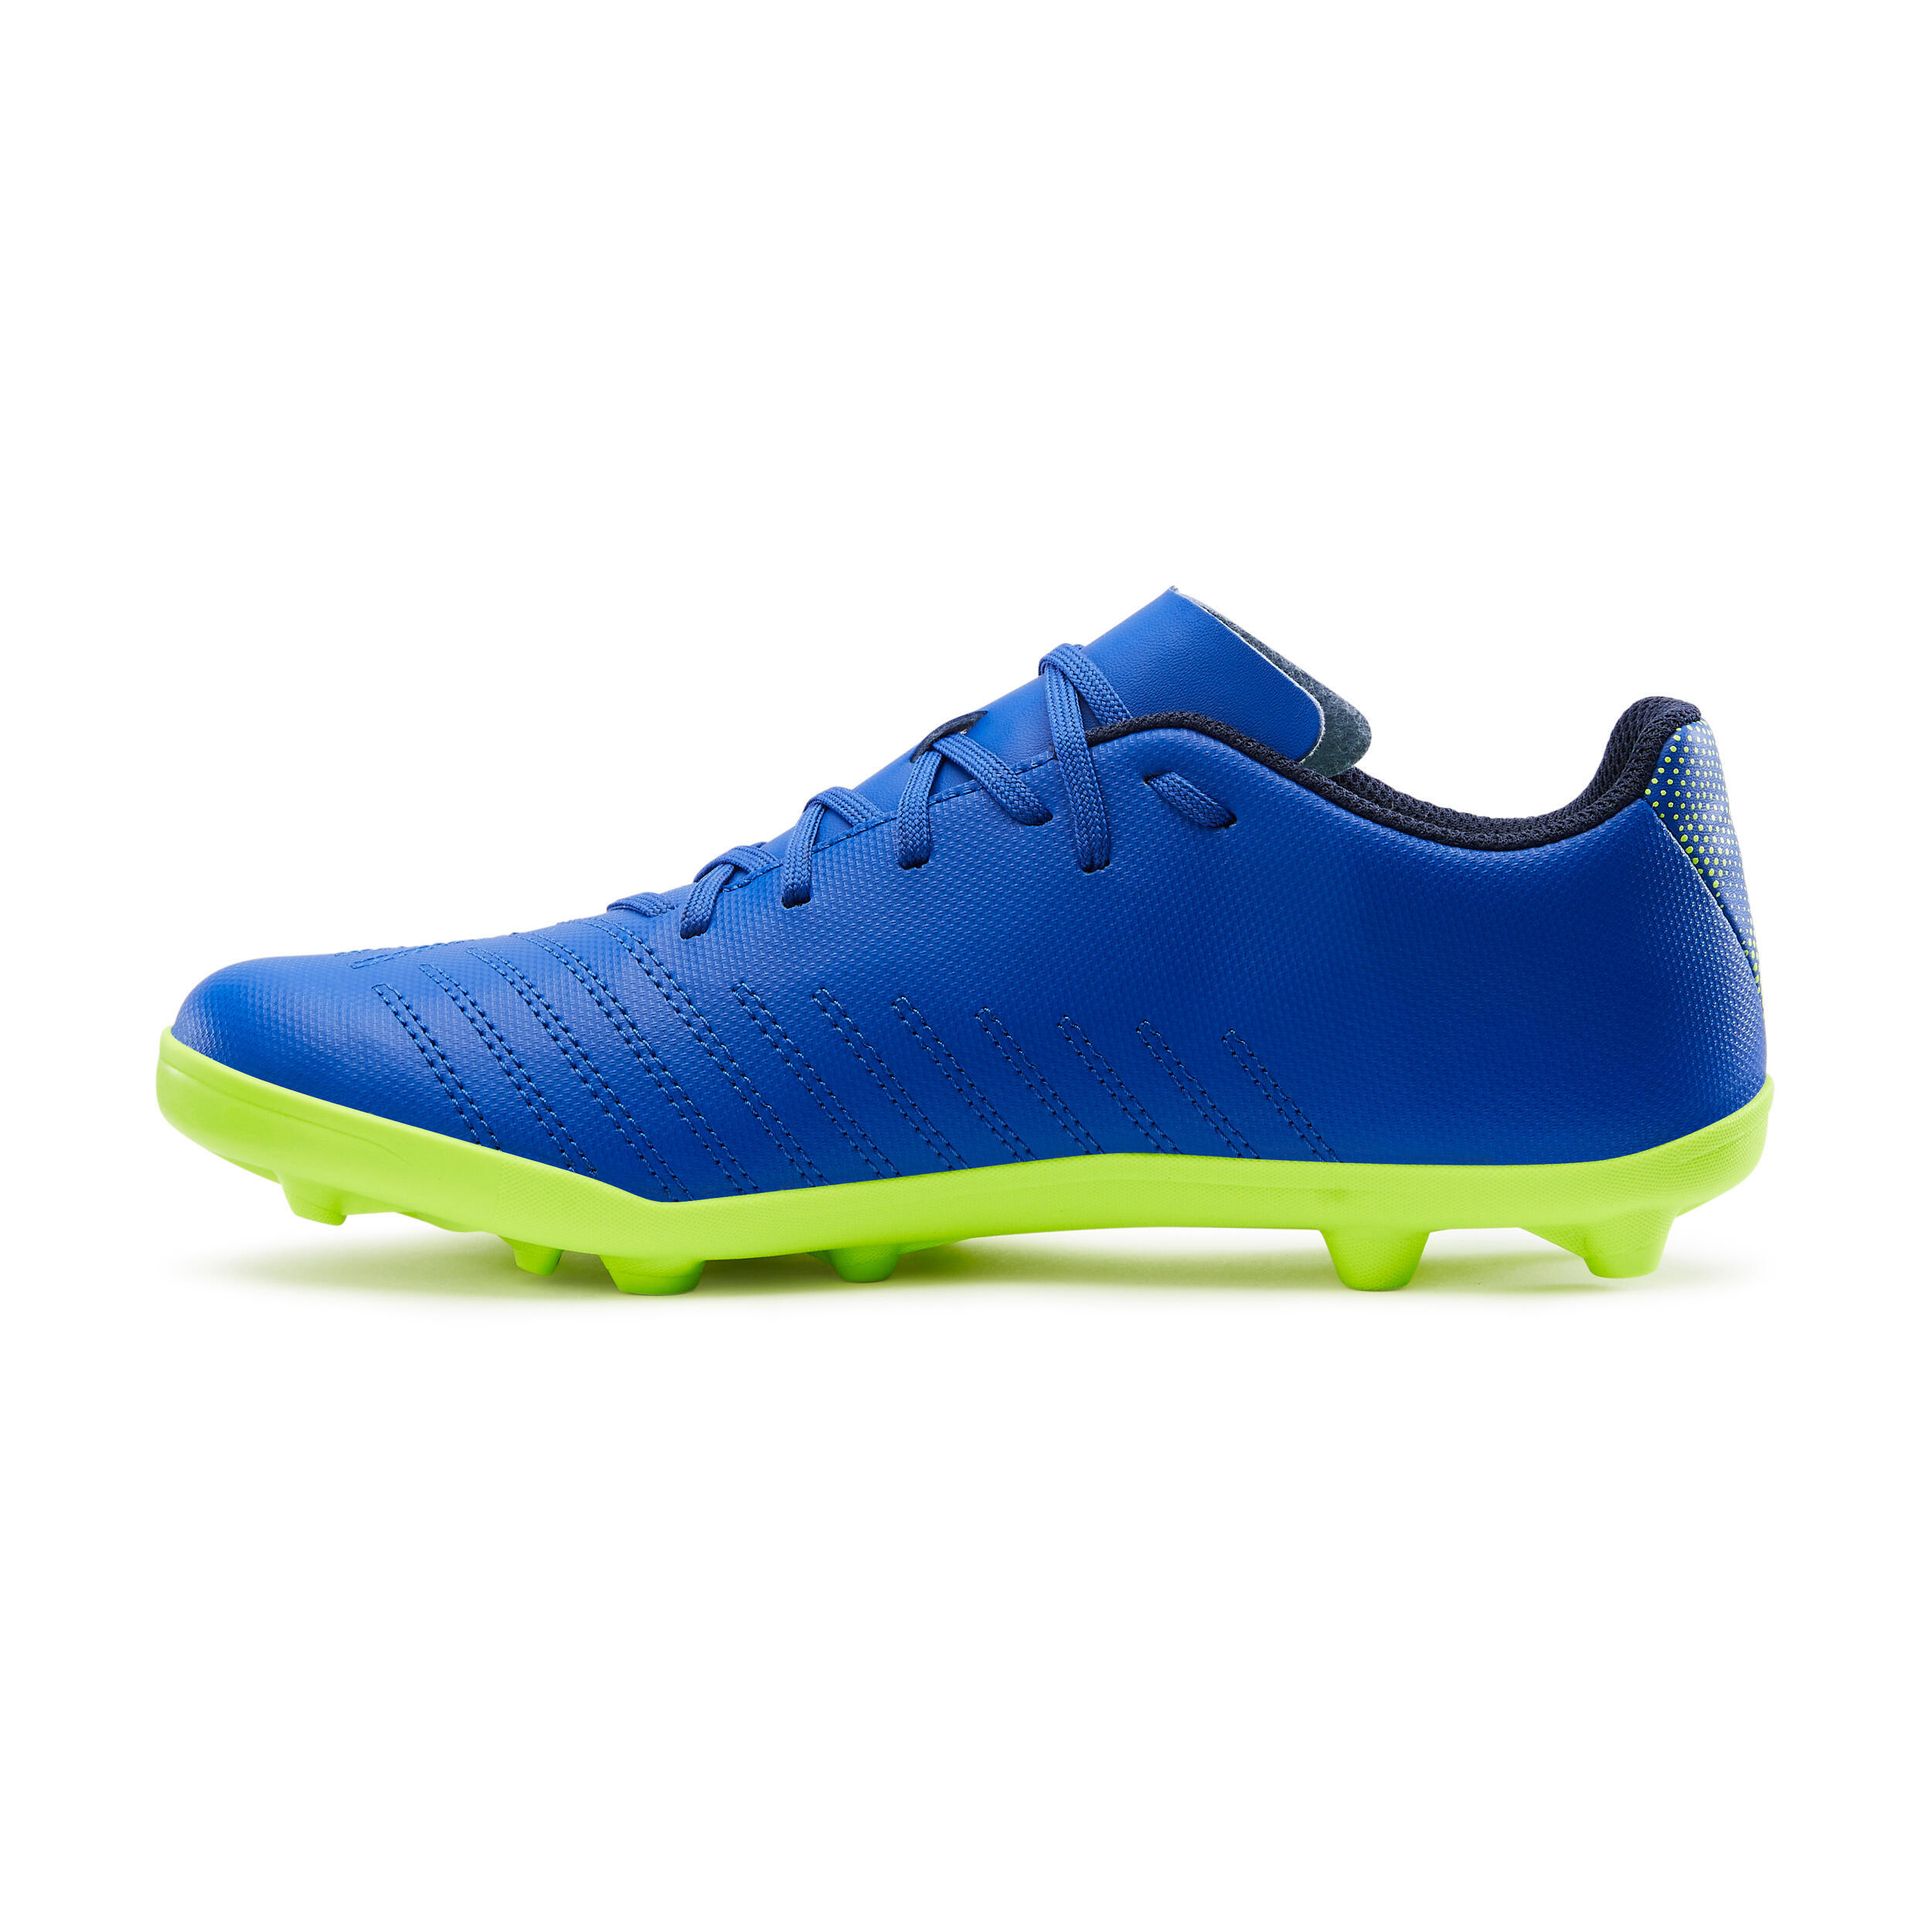 Kids' Dry Pitch Lace-Up Football Boots Agility 140 FG - Blue/Yellow 3/8